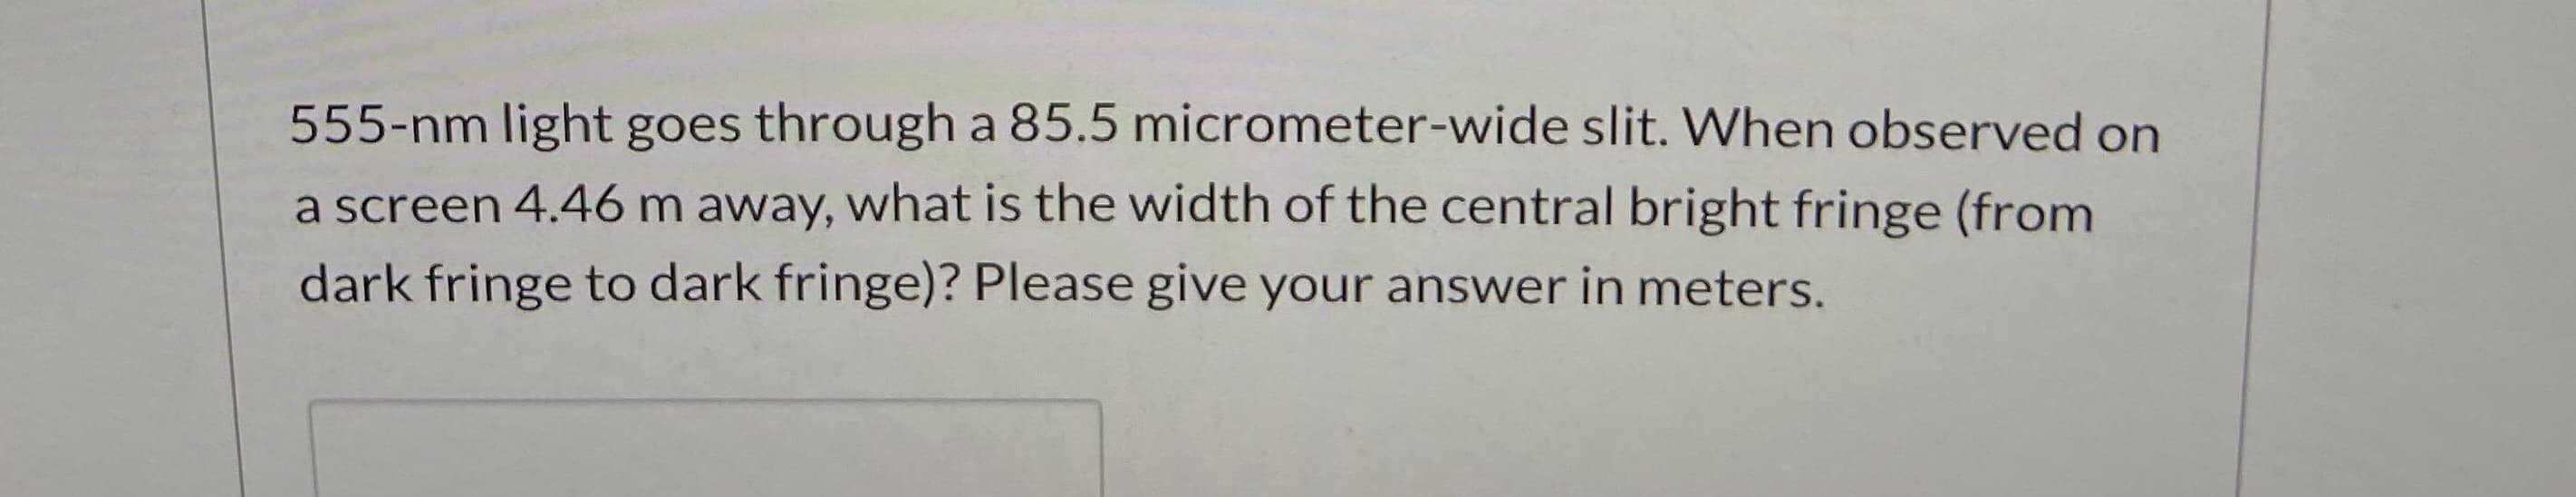 555-nm light goes through a 85.5 micrometer-wide slit. When observed on
a screen 4.46 m away, what is the width of the central bright fringe (from
dark fringe to dark fringe)? Please give your answer in meters.
